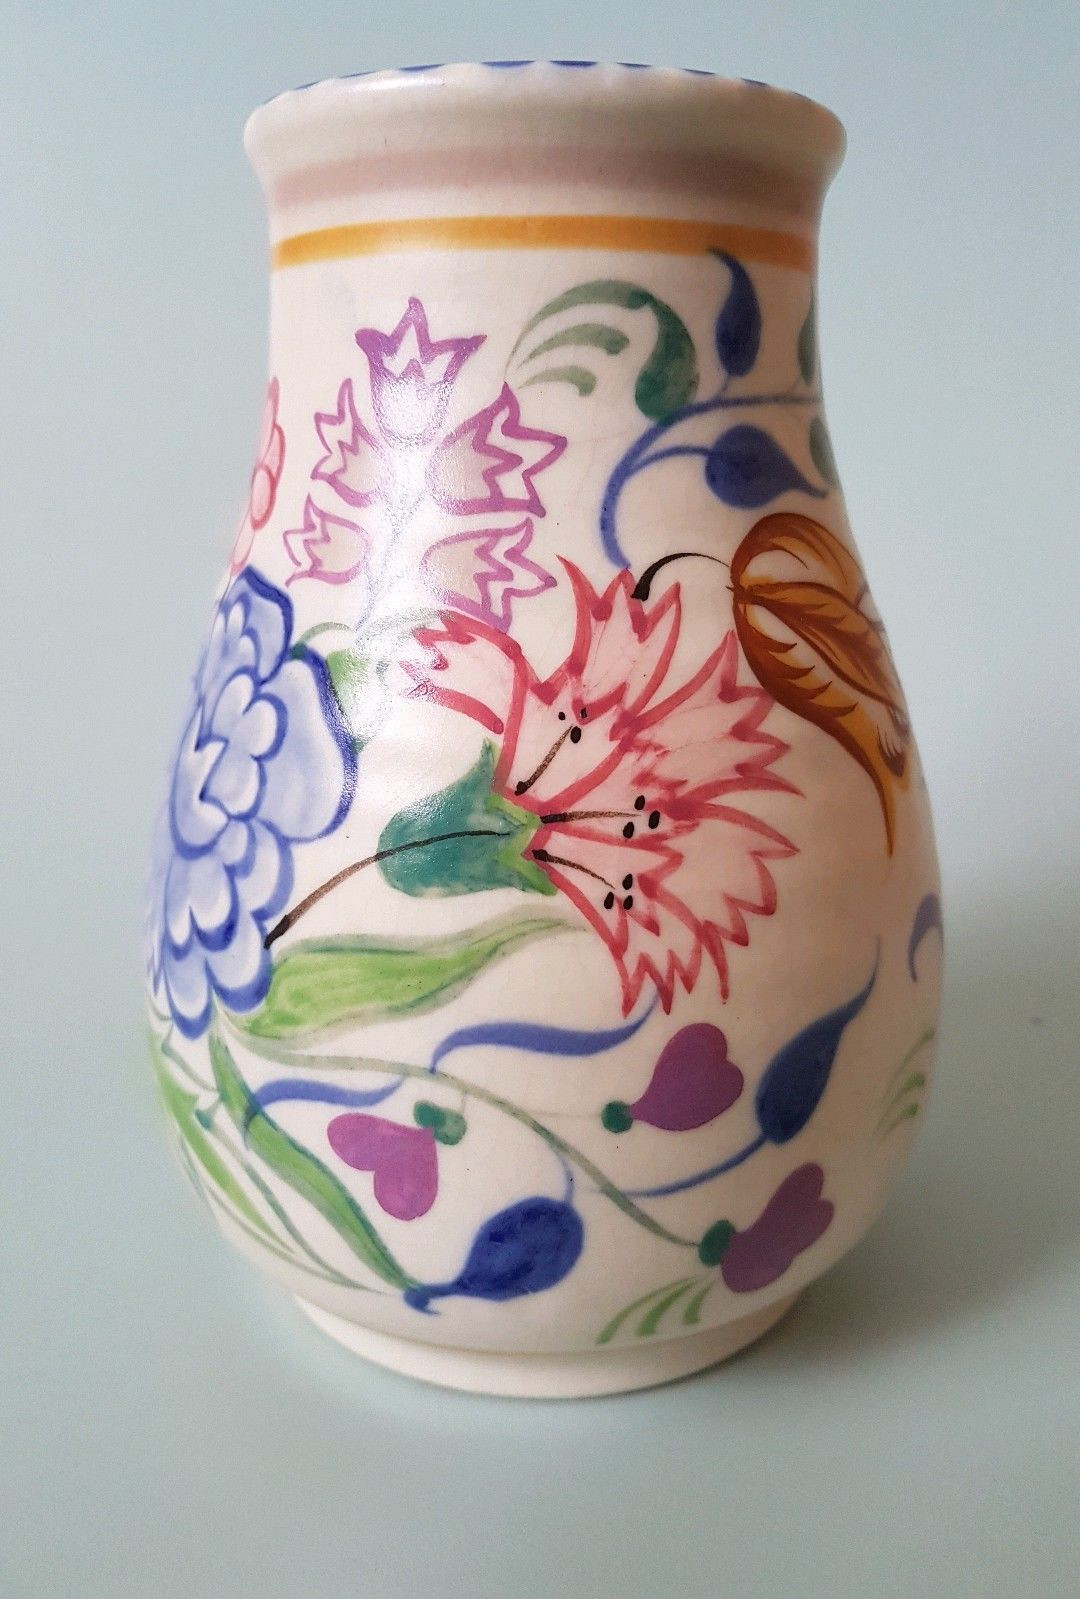 29 Awesome Art Deco Blue Vase 2024 free download art deco blue vase of poole pottery 1930s vase bn pattern art deco floral hilda hampton within poole pottery 1930s vase bn pattern art deco floral hilda hampton 1 of 4free shipping poole pot